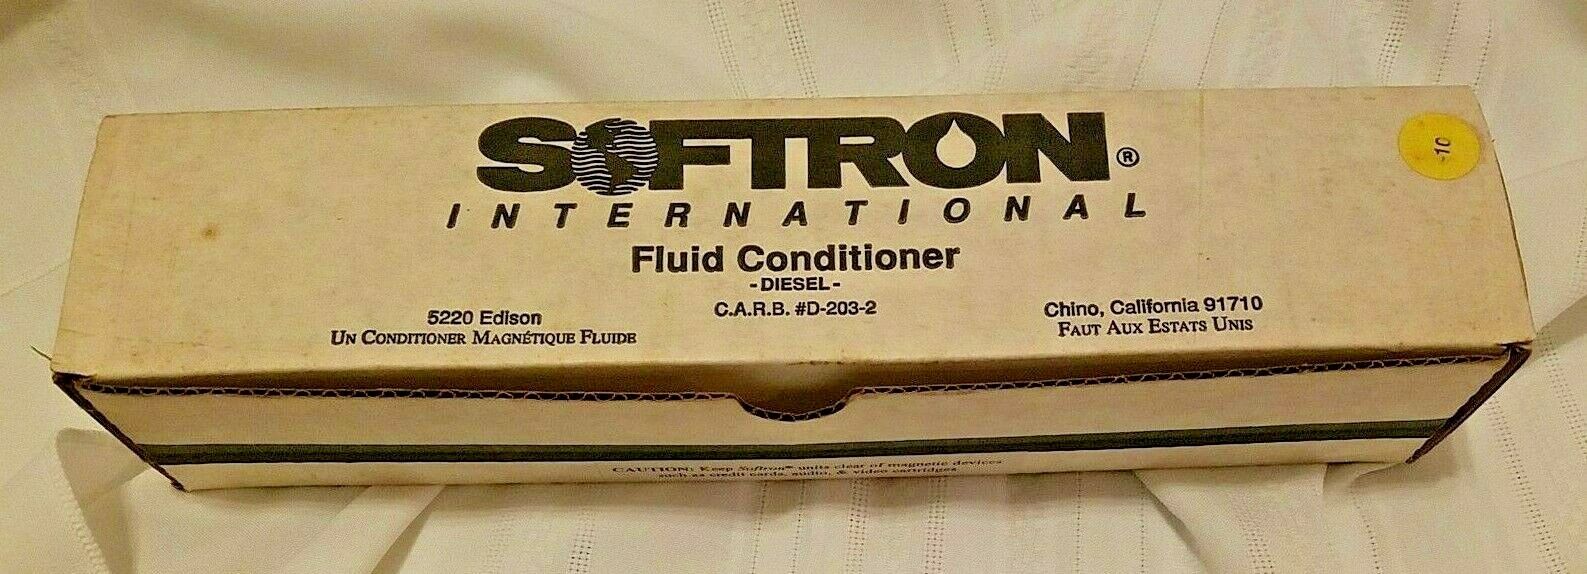 Softron Max 60% OFF Diesel Fuel Conditioner No. 5% OFF 3050 Model